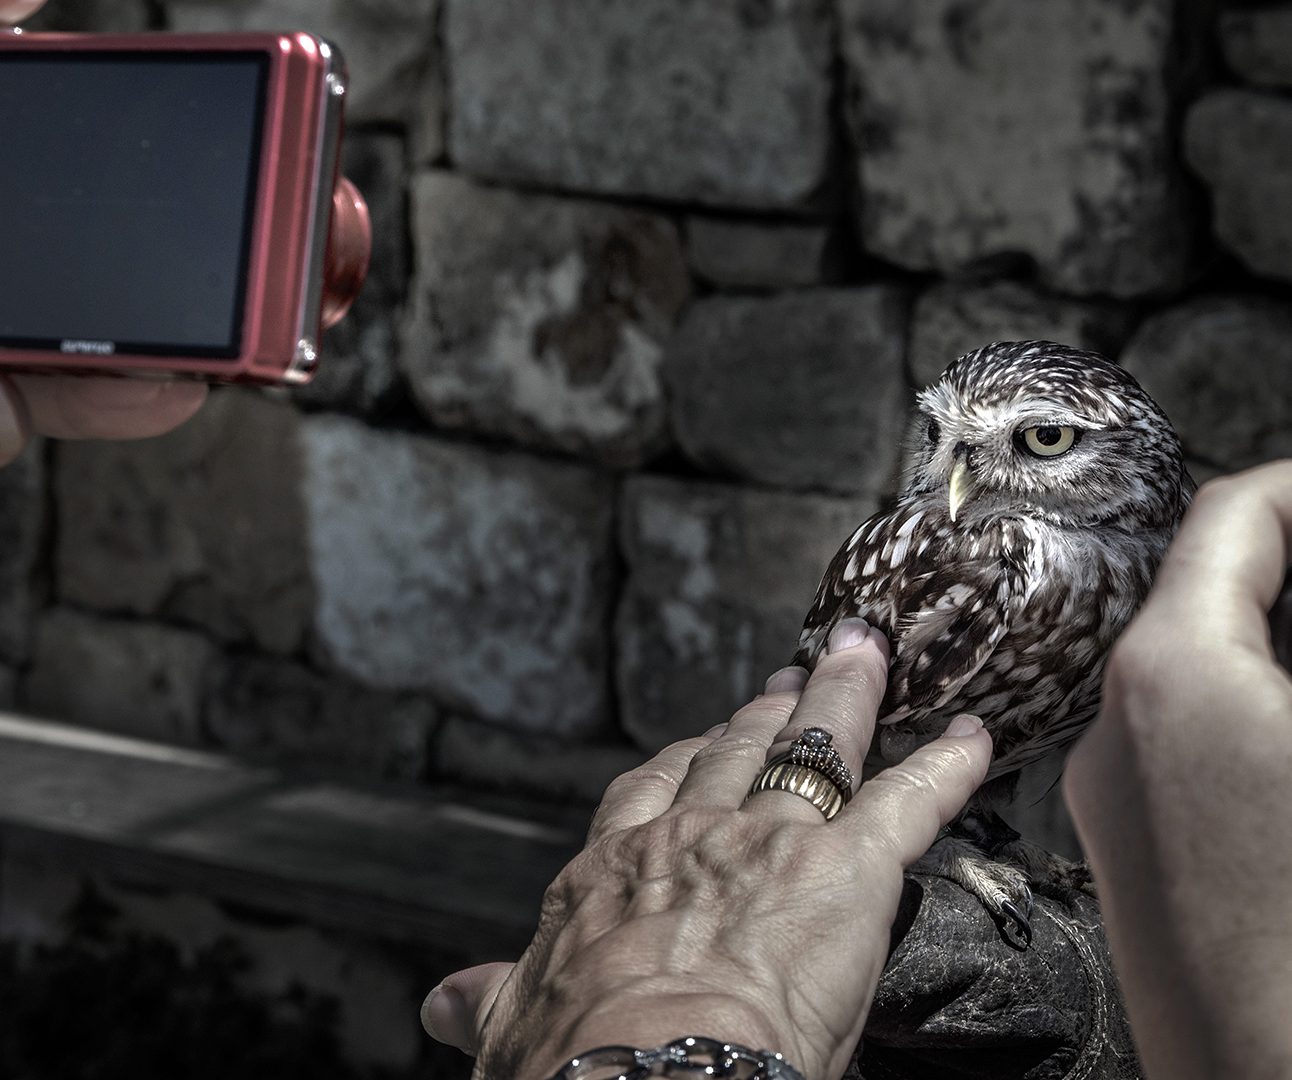 A photo of a small owl in a captive setting. People are taking close-up photos and touching the bird.